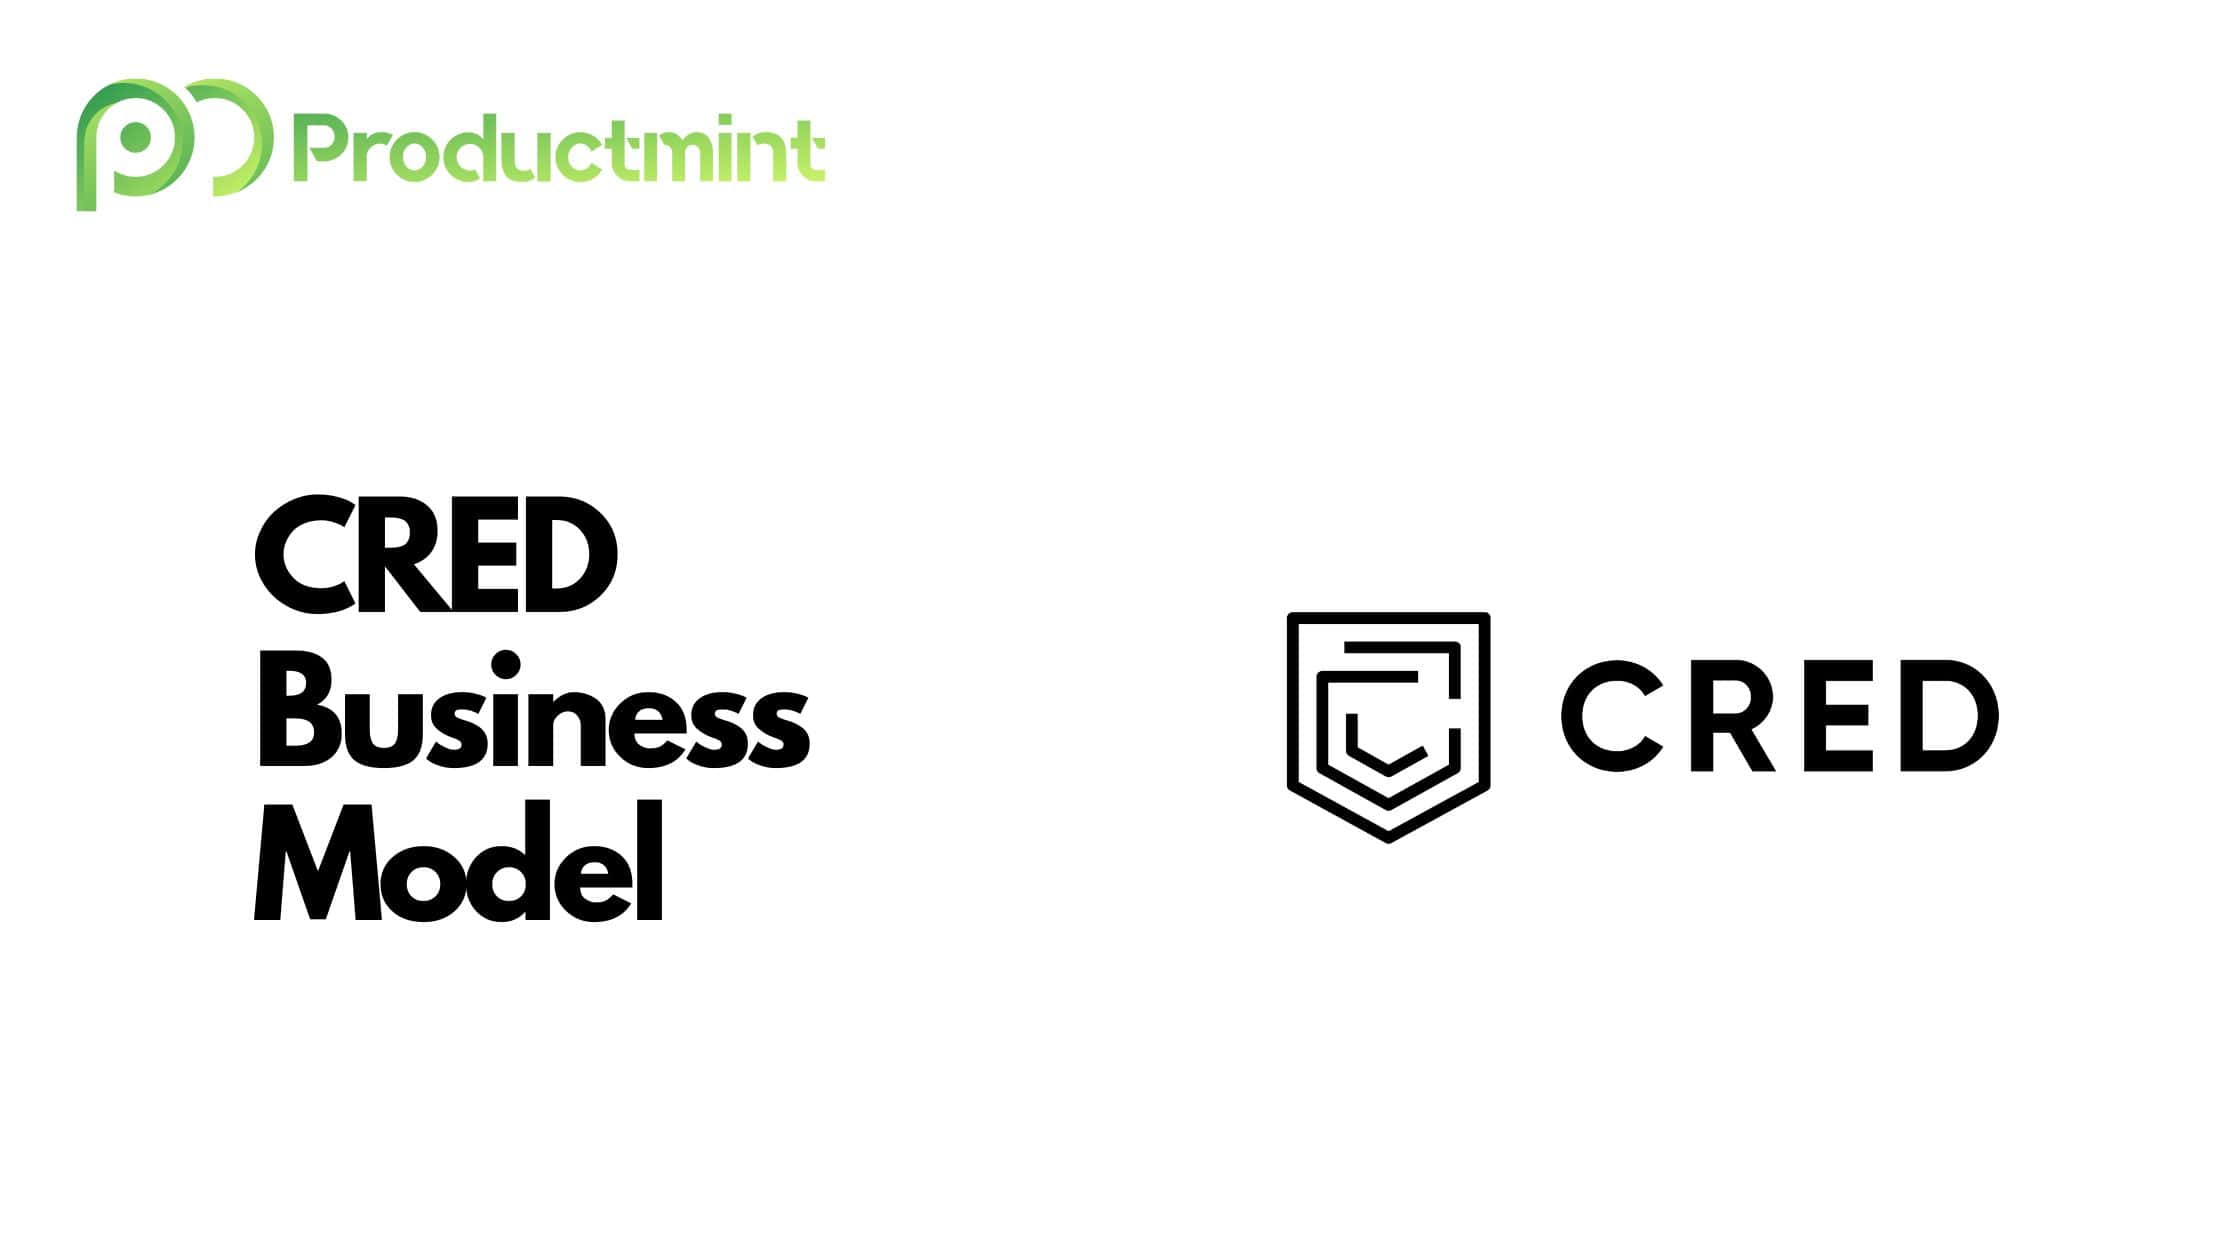 CRED Business Model